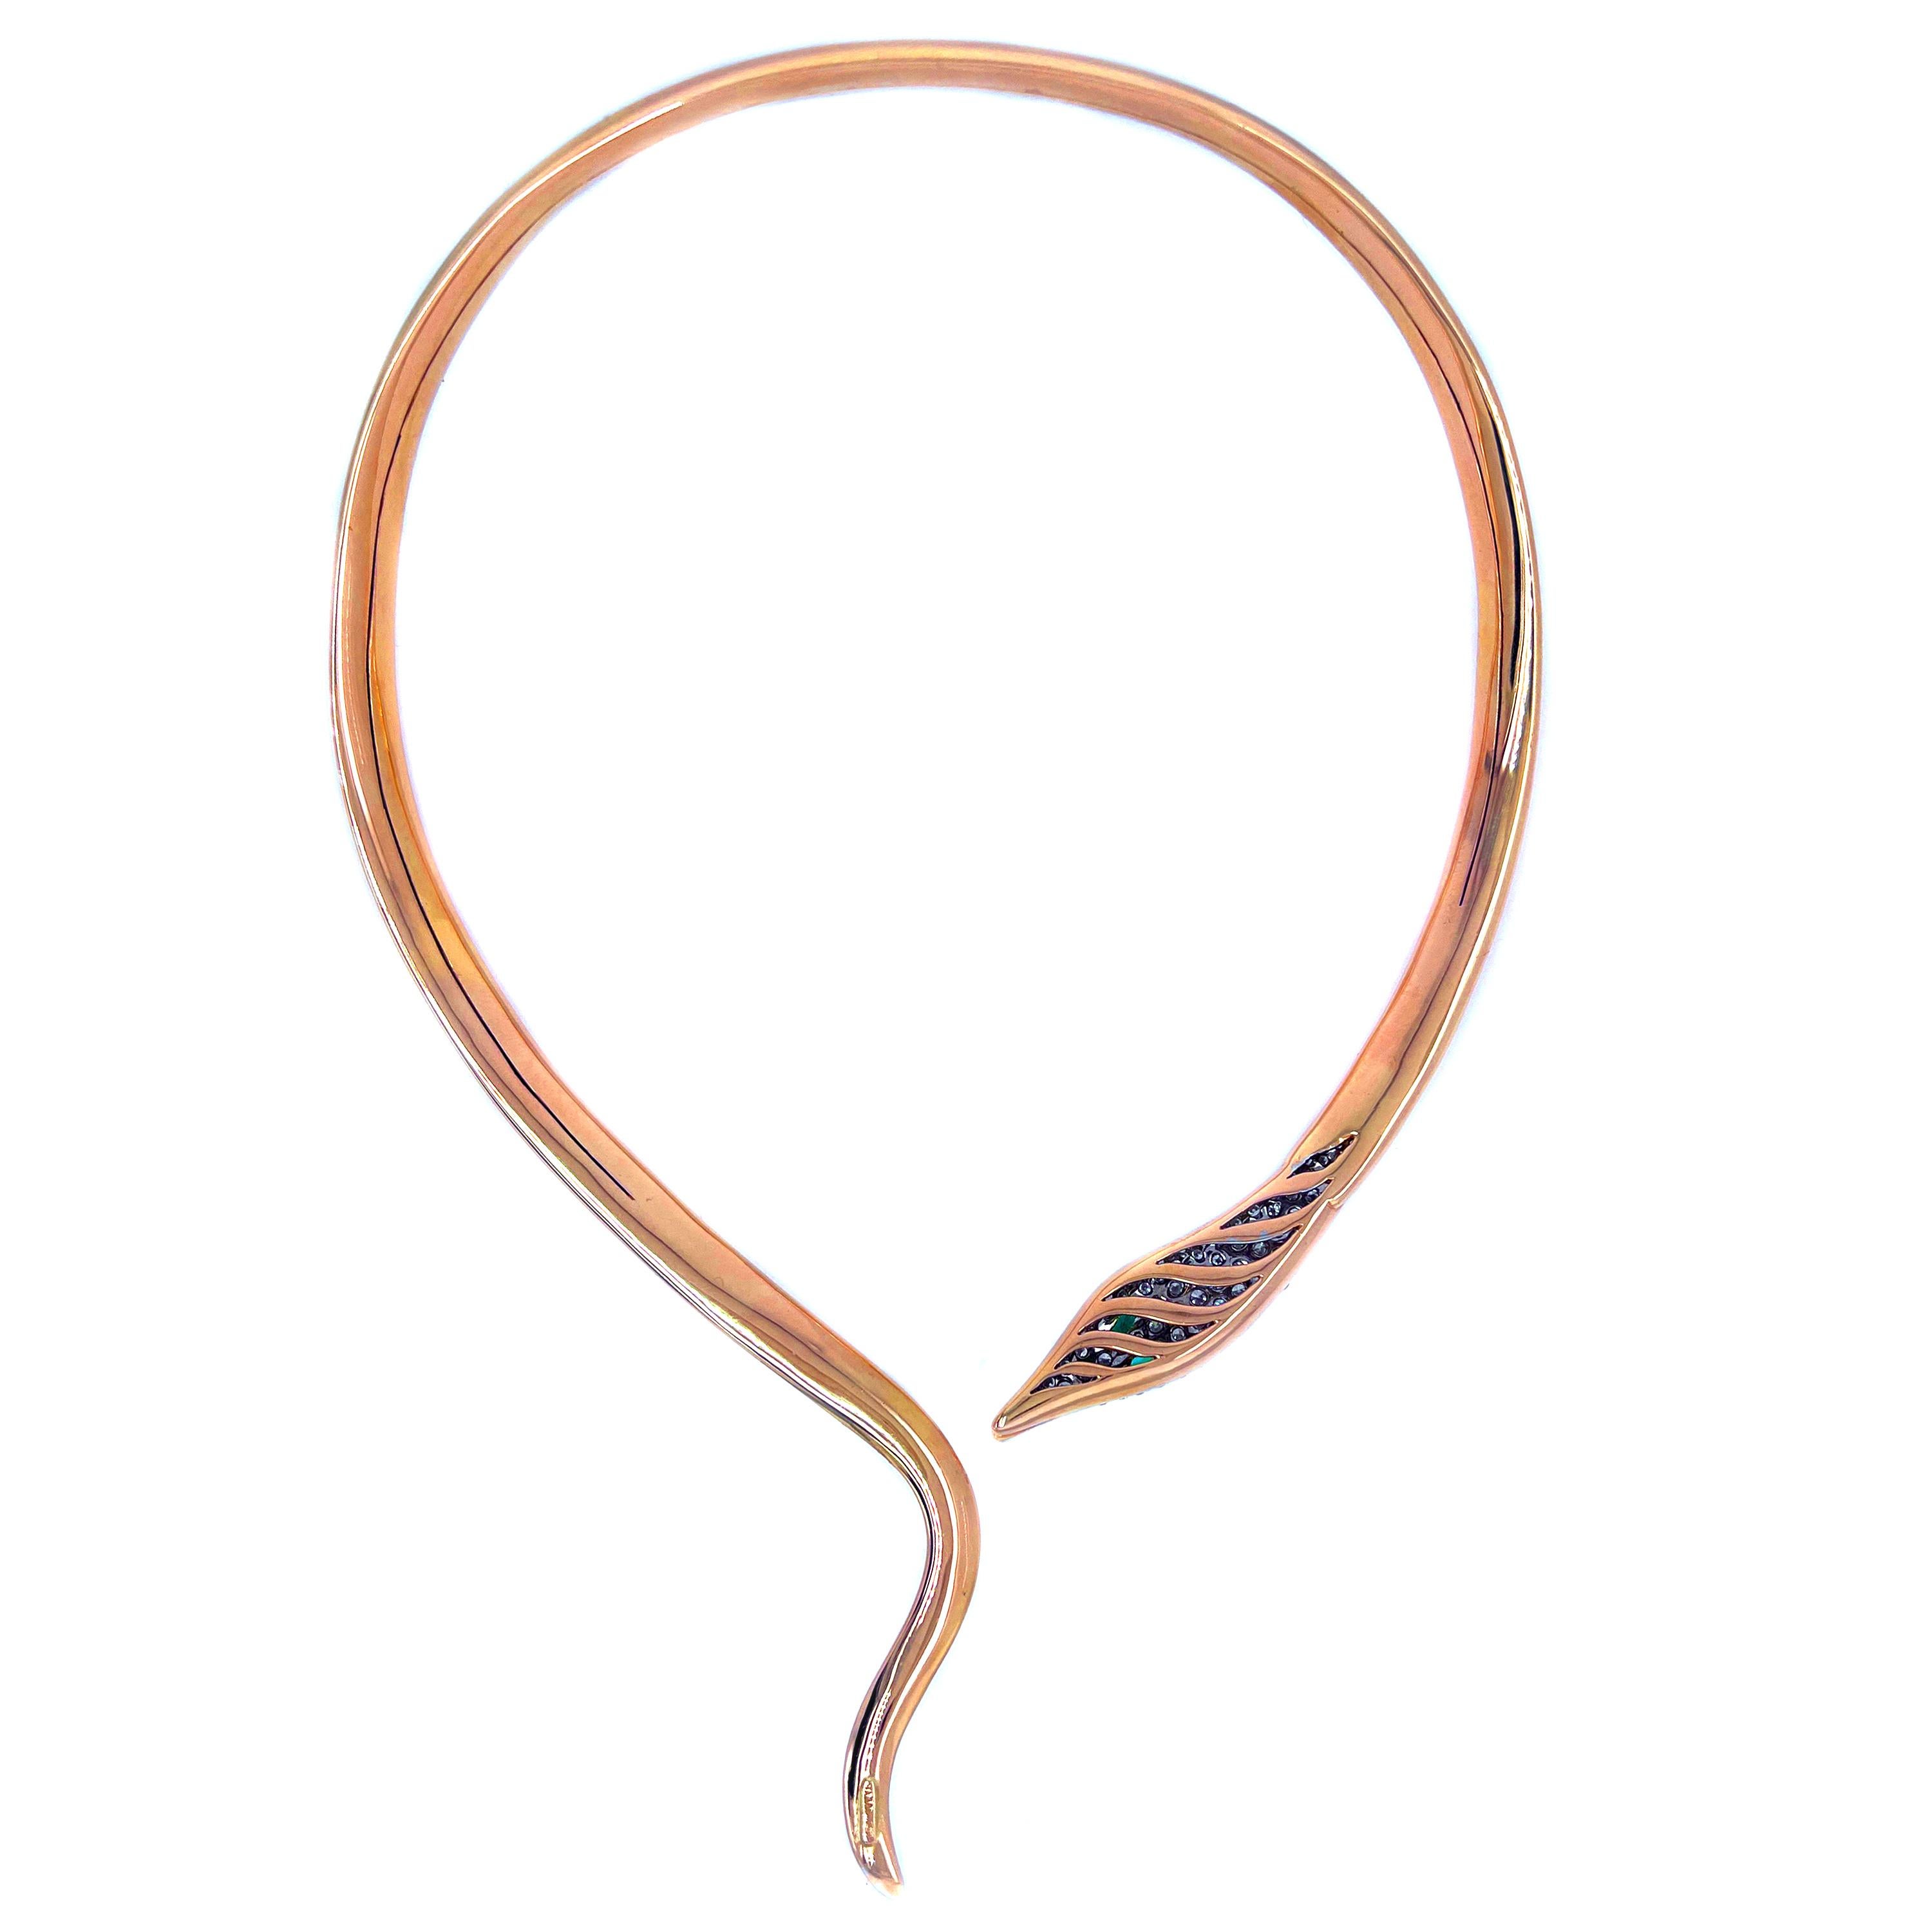 Nardi 18K Rose Gold and Diamonds Marquise Emerald Snake Drop Collar Necklace

This state-of-the-art piece, signed Nardi features a high-polished, 18k rose gold finish that is a diamond-headed snake with emerald eyes.

Apprx. 2.50 carat, G color, VS